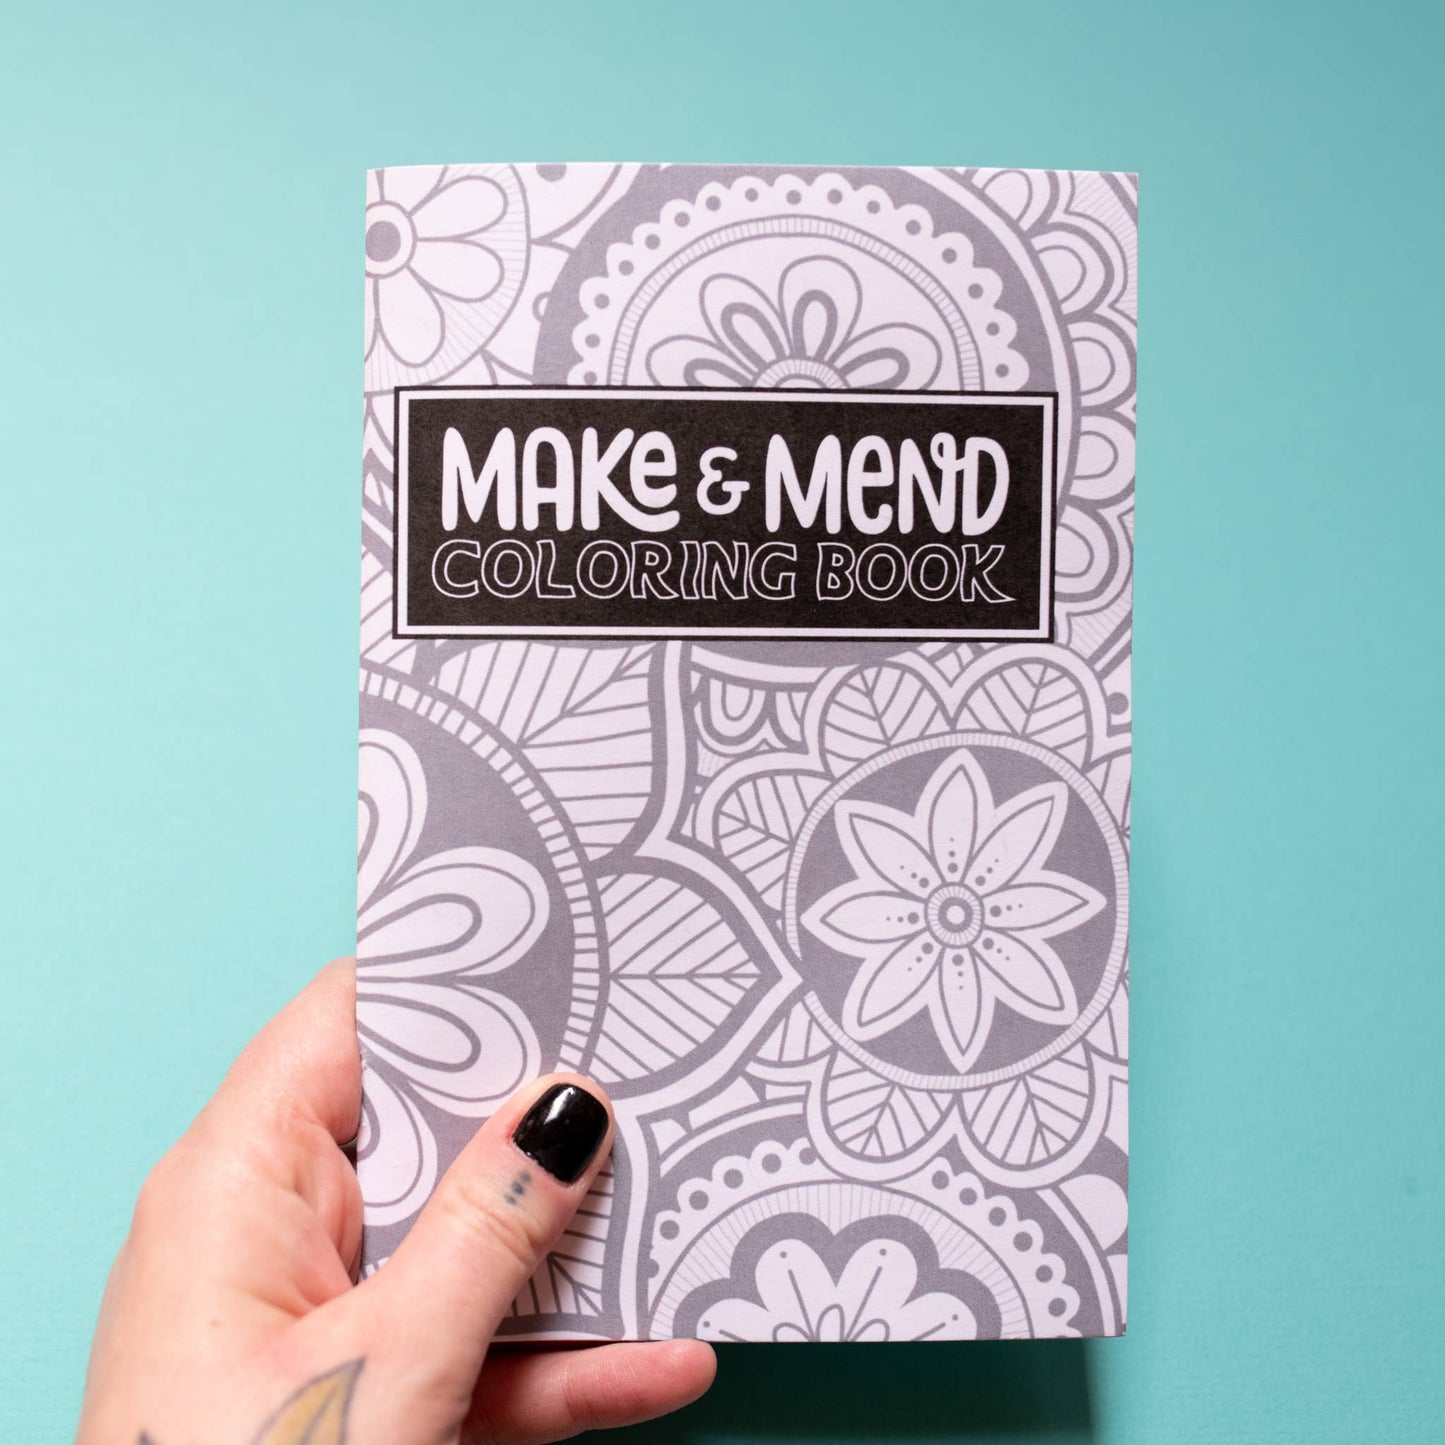 Make & Mend - Make & Mend Coloring Book for Artists